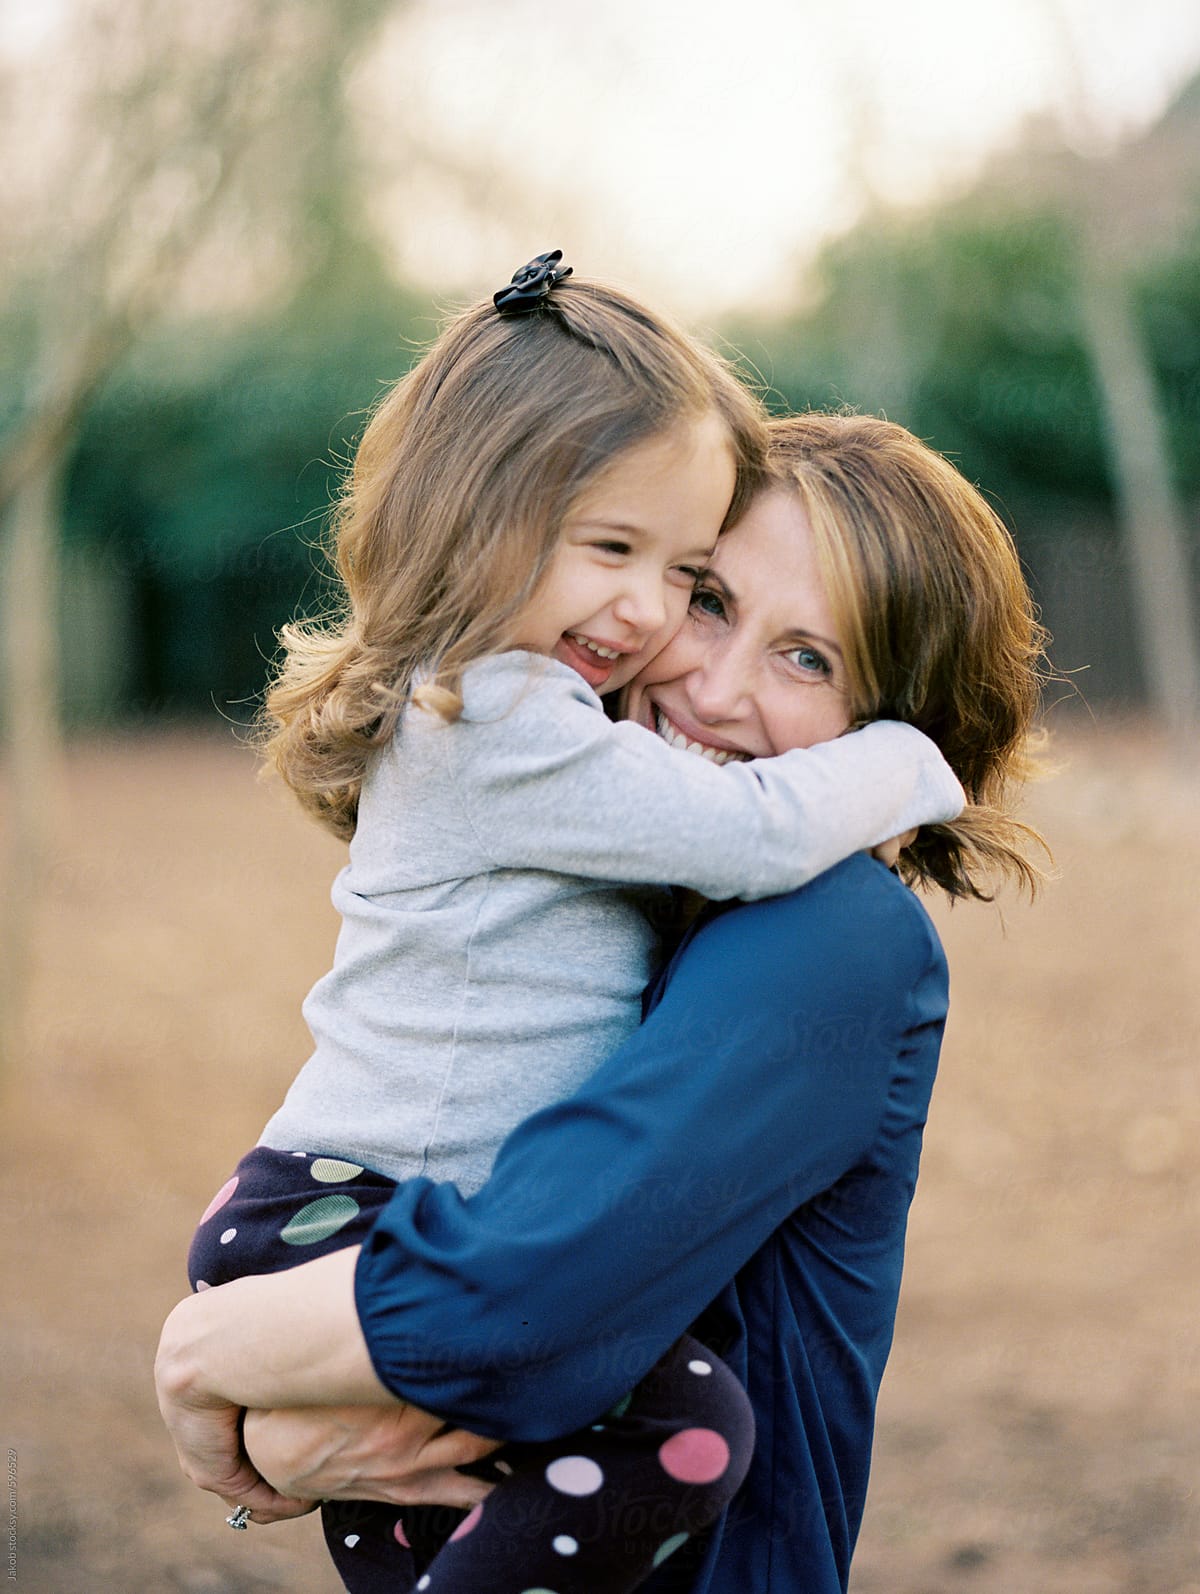 Mother And Daughter Hugging By Stocksy Contributor Jakob Lagerstedt 